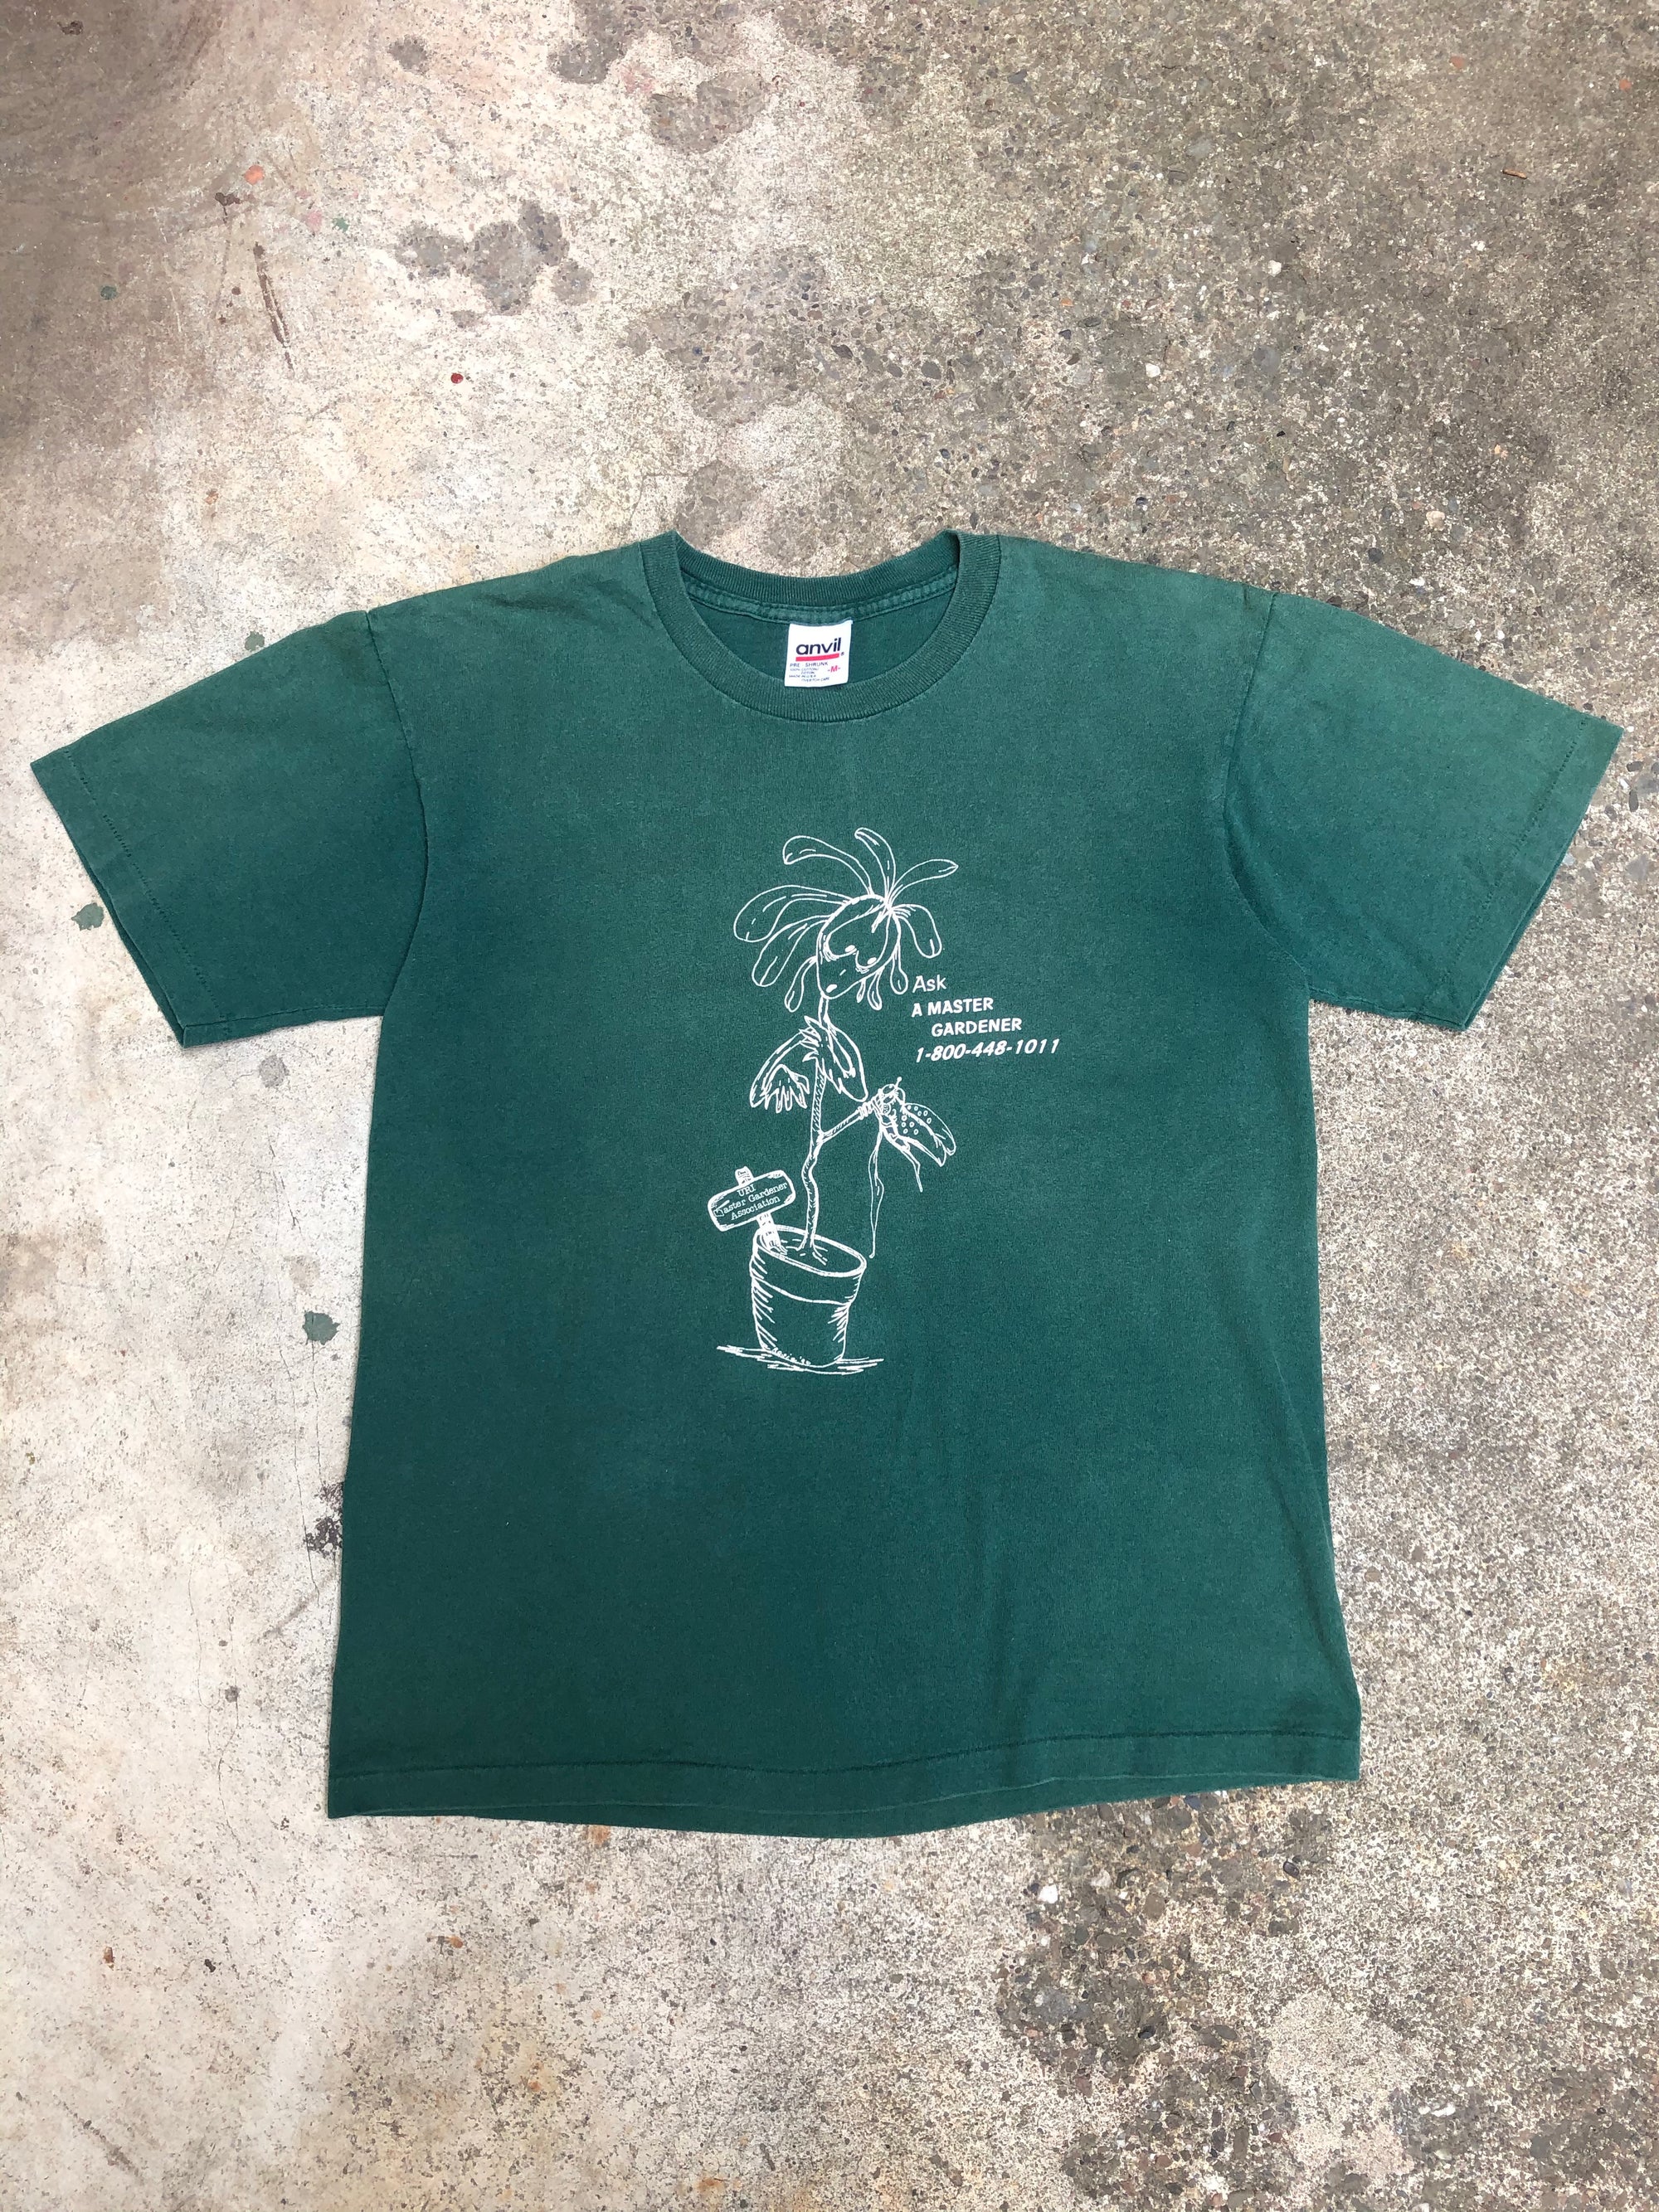 1990s Single Stitched Sun Faded “Ask A Master Gardener” Tee